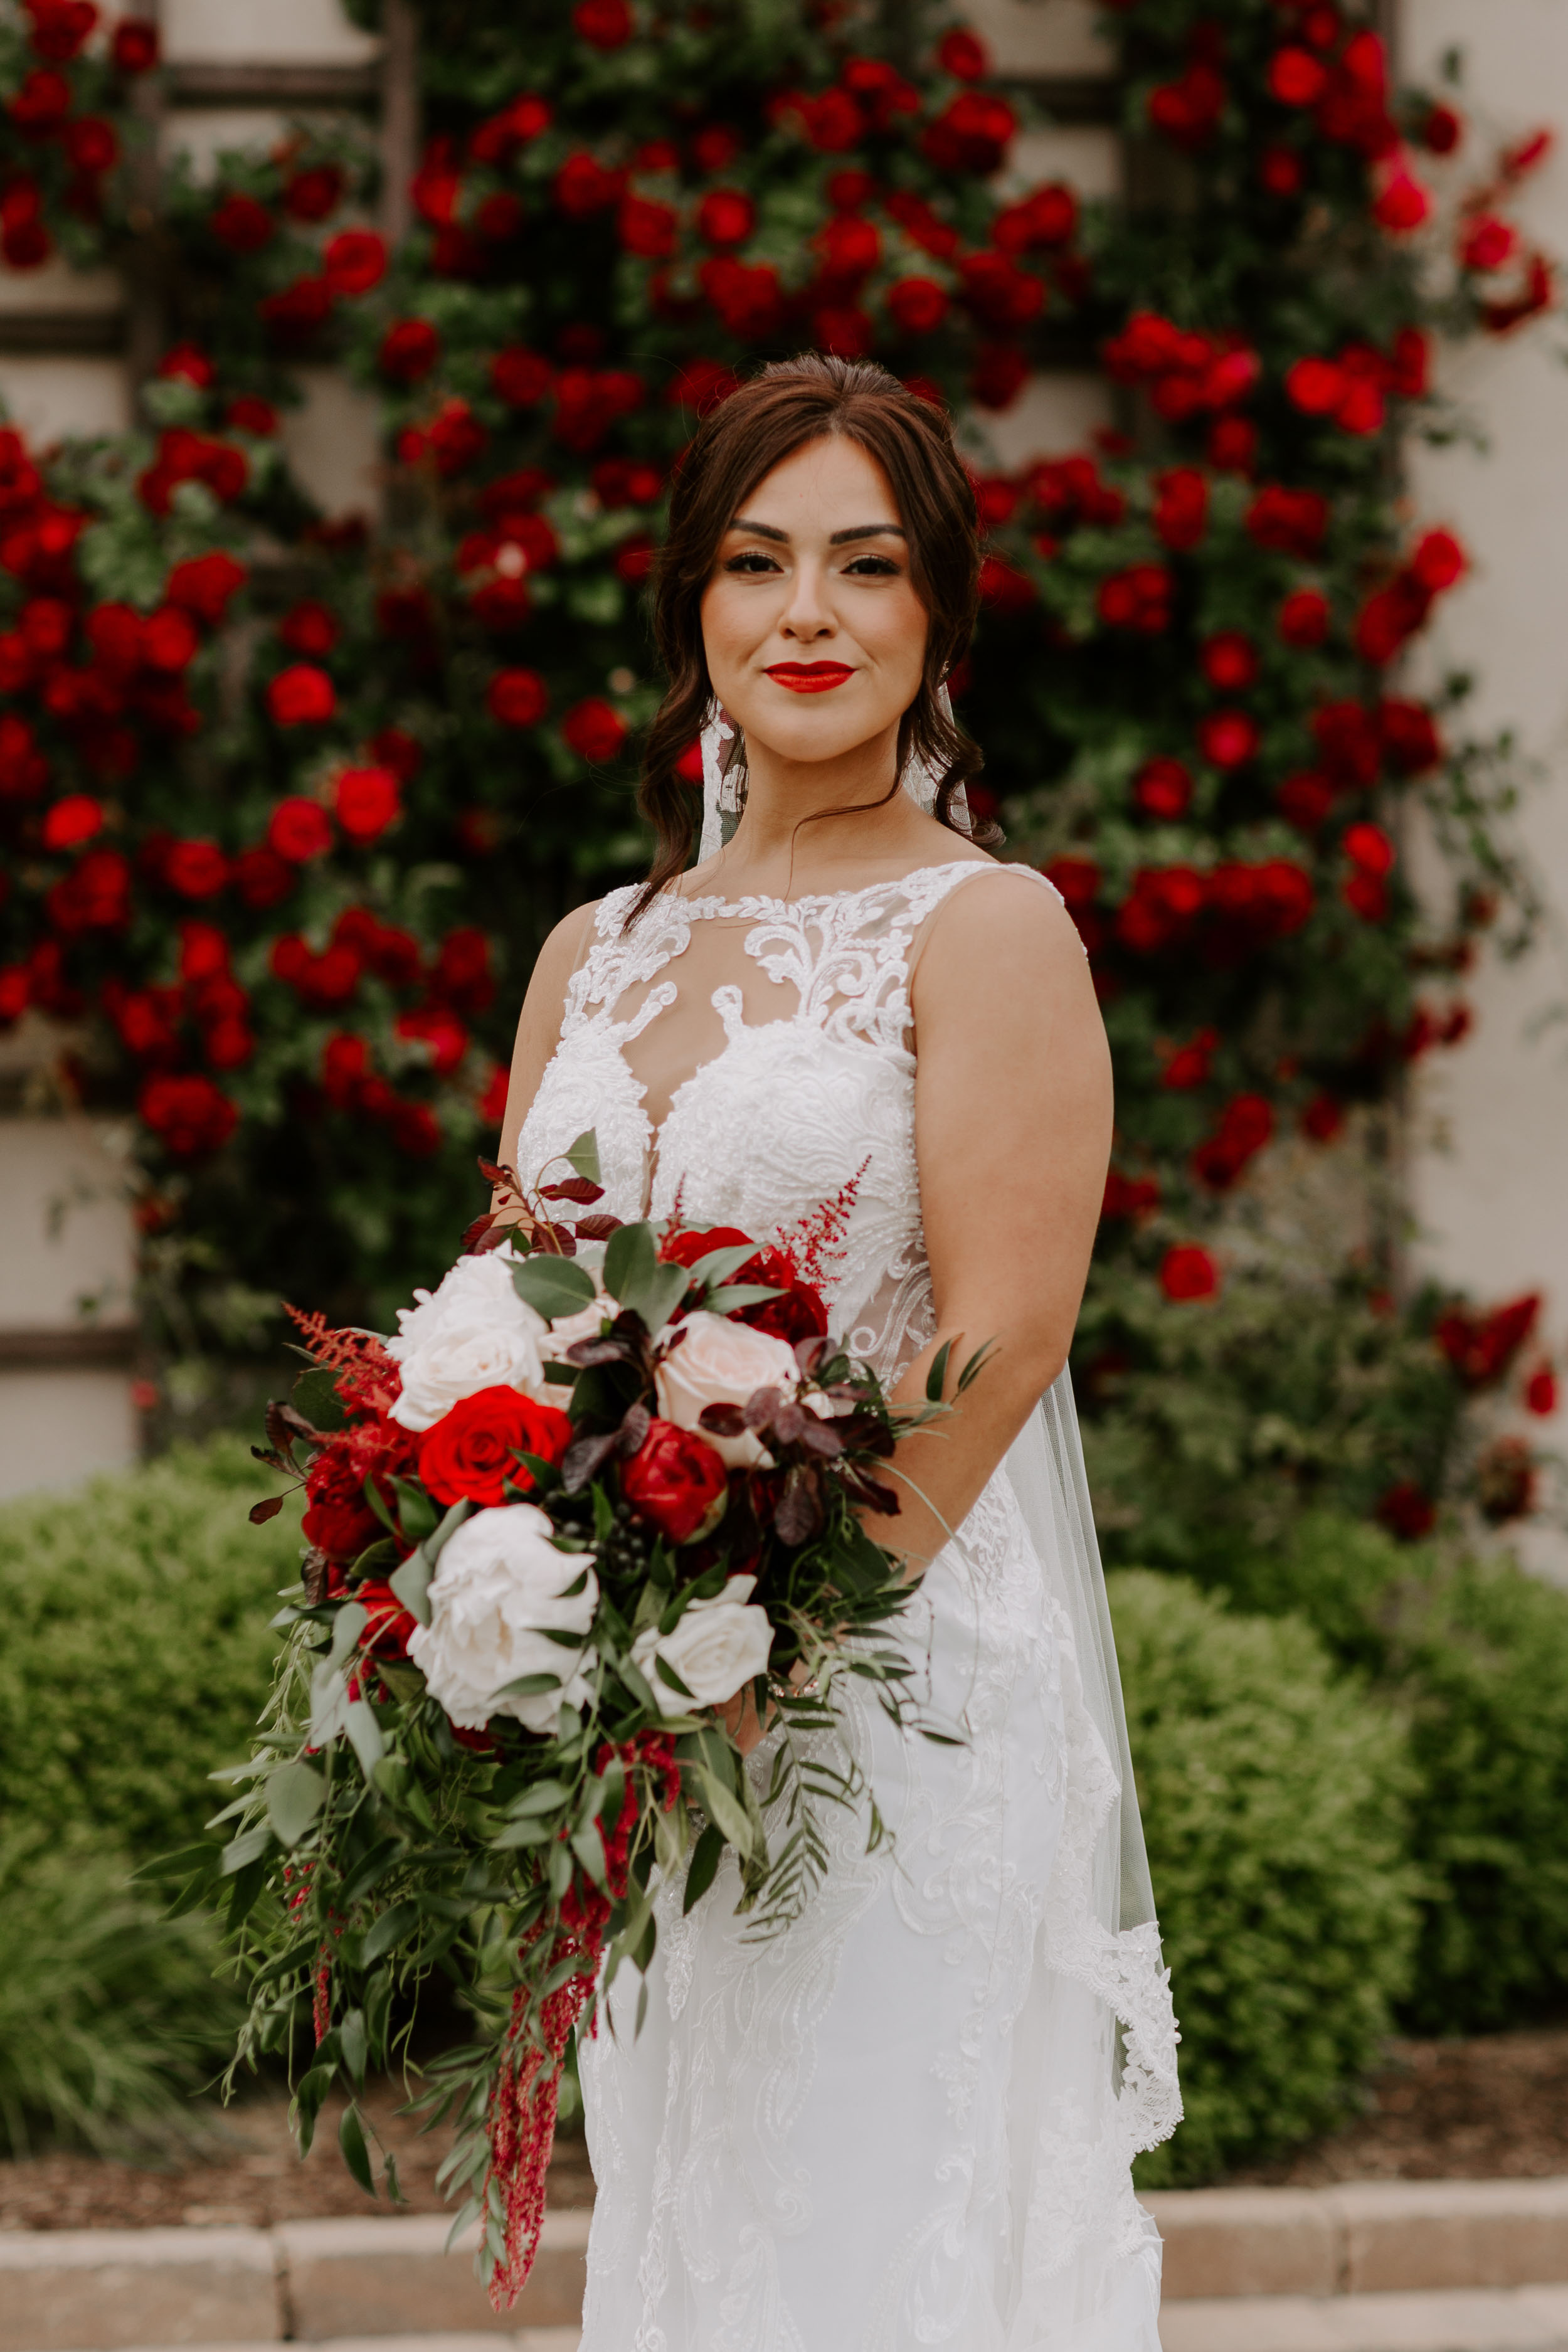 Portrait of Bride With Red Bouquet | Mistwood Golf Club Wedding | Chicagoland Country Club Weddings | Best Golf Courses for Weddings
